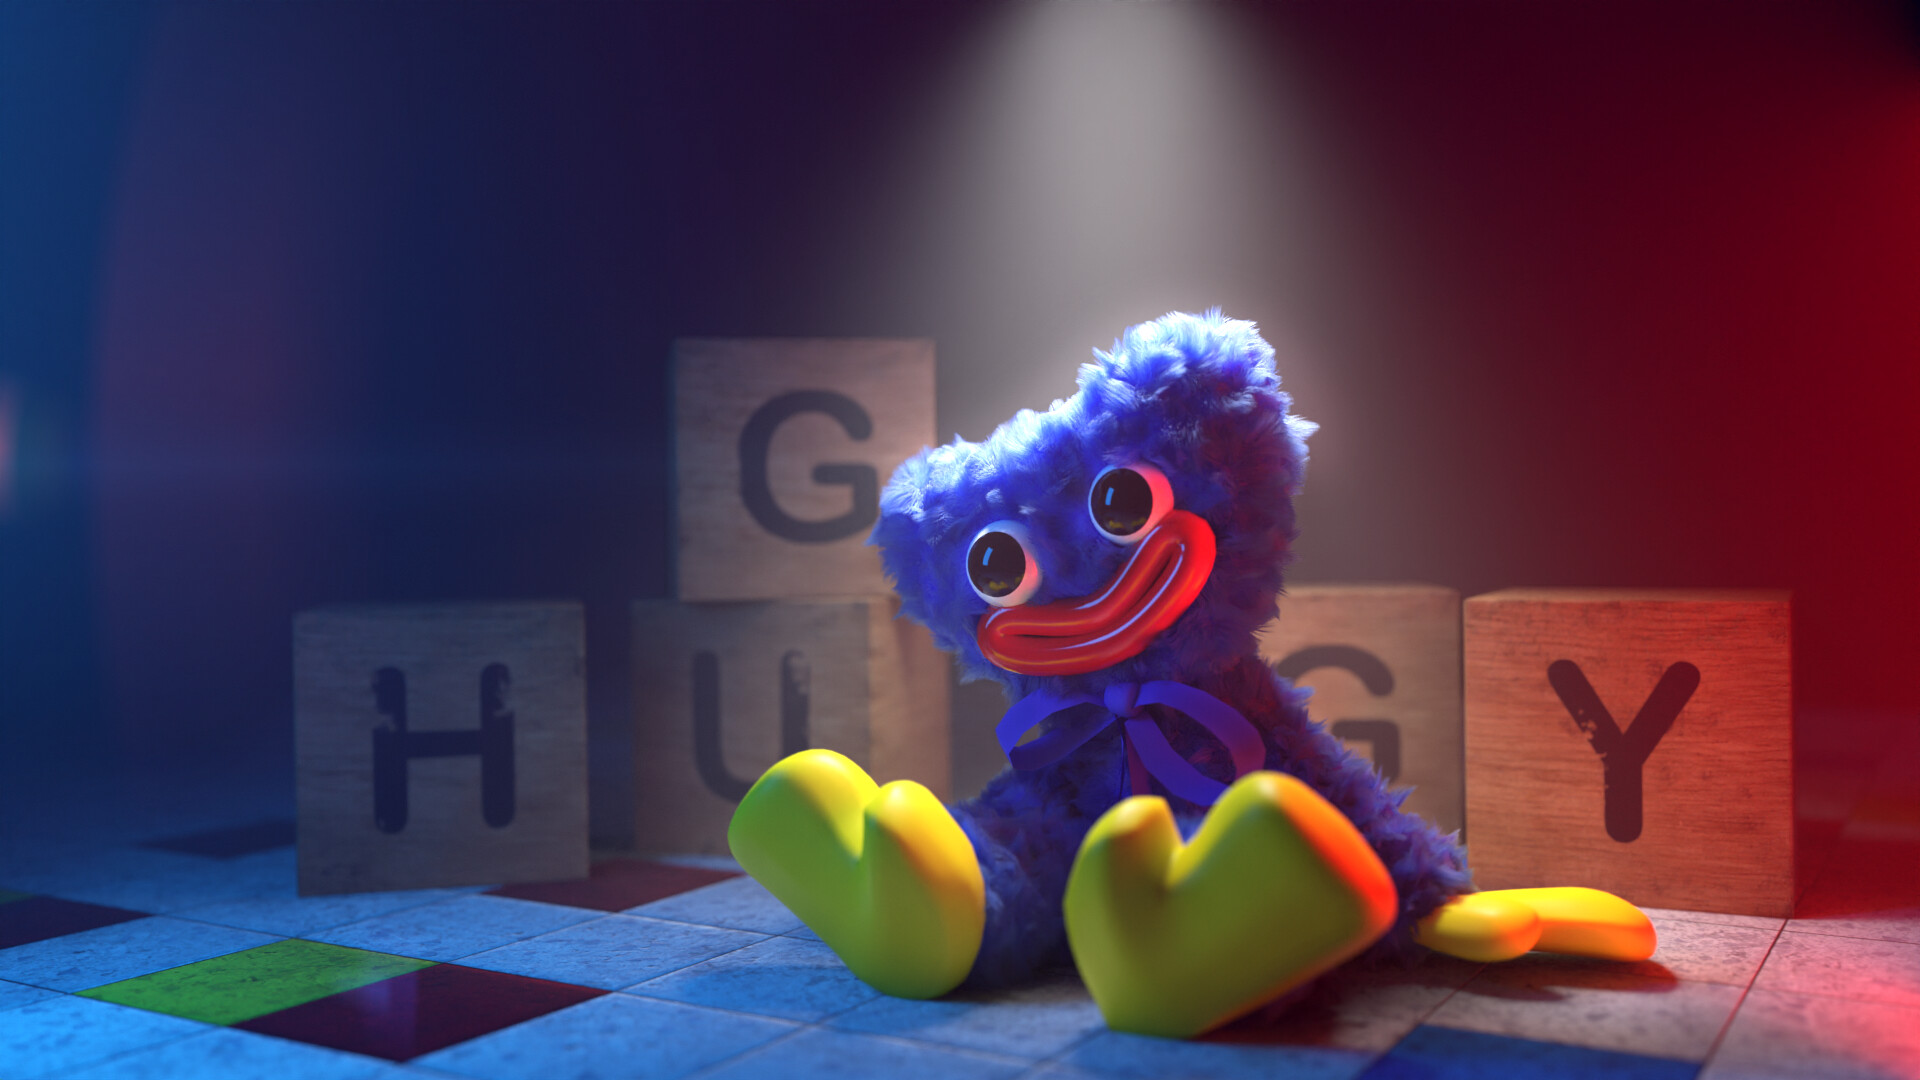 Huggy Wuggy: Looking a huggable, friendly mascot, A toy to be embraced by children, Yellow hands, Red lips. 1920x1080 Full HD Wallpaper.